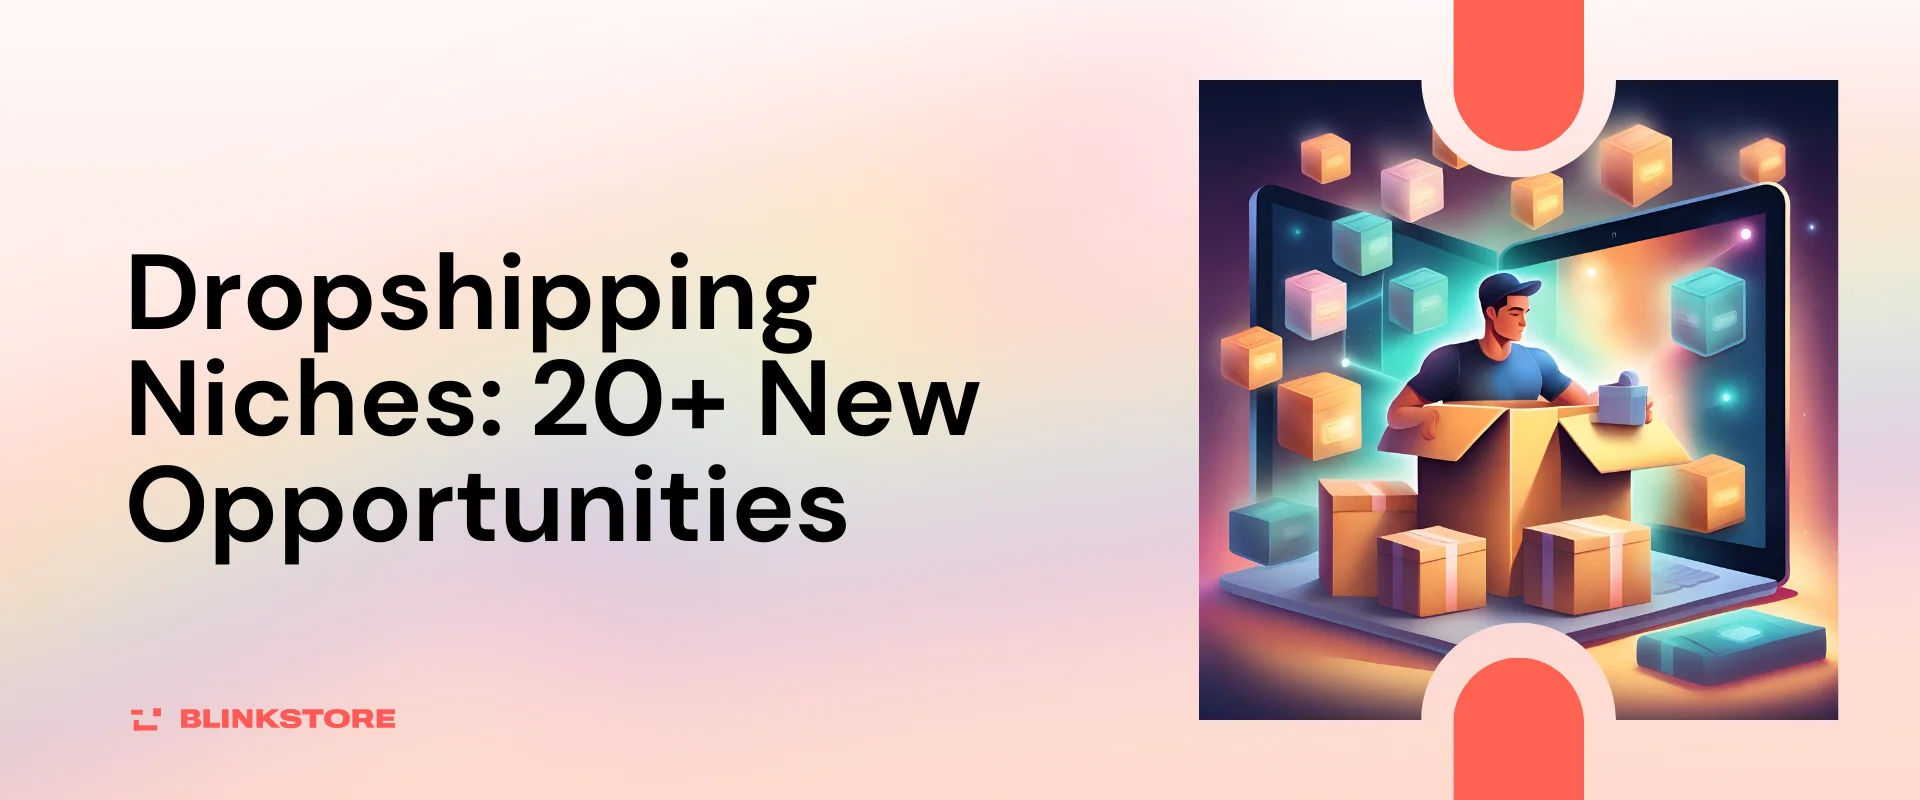 Dropshipping Niches: 20+ New Opportunities with a Major Potential